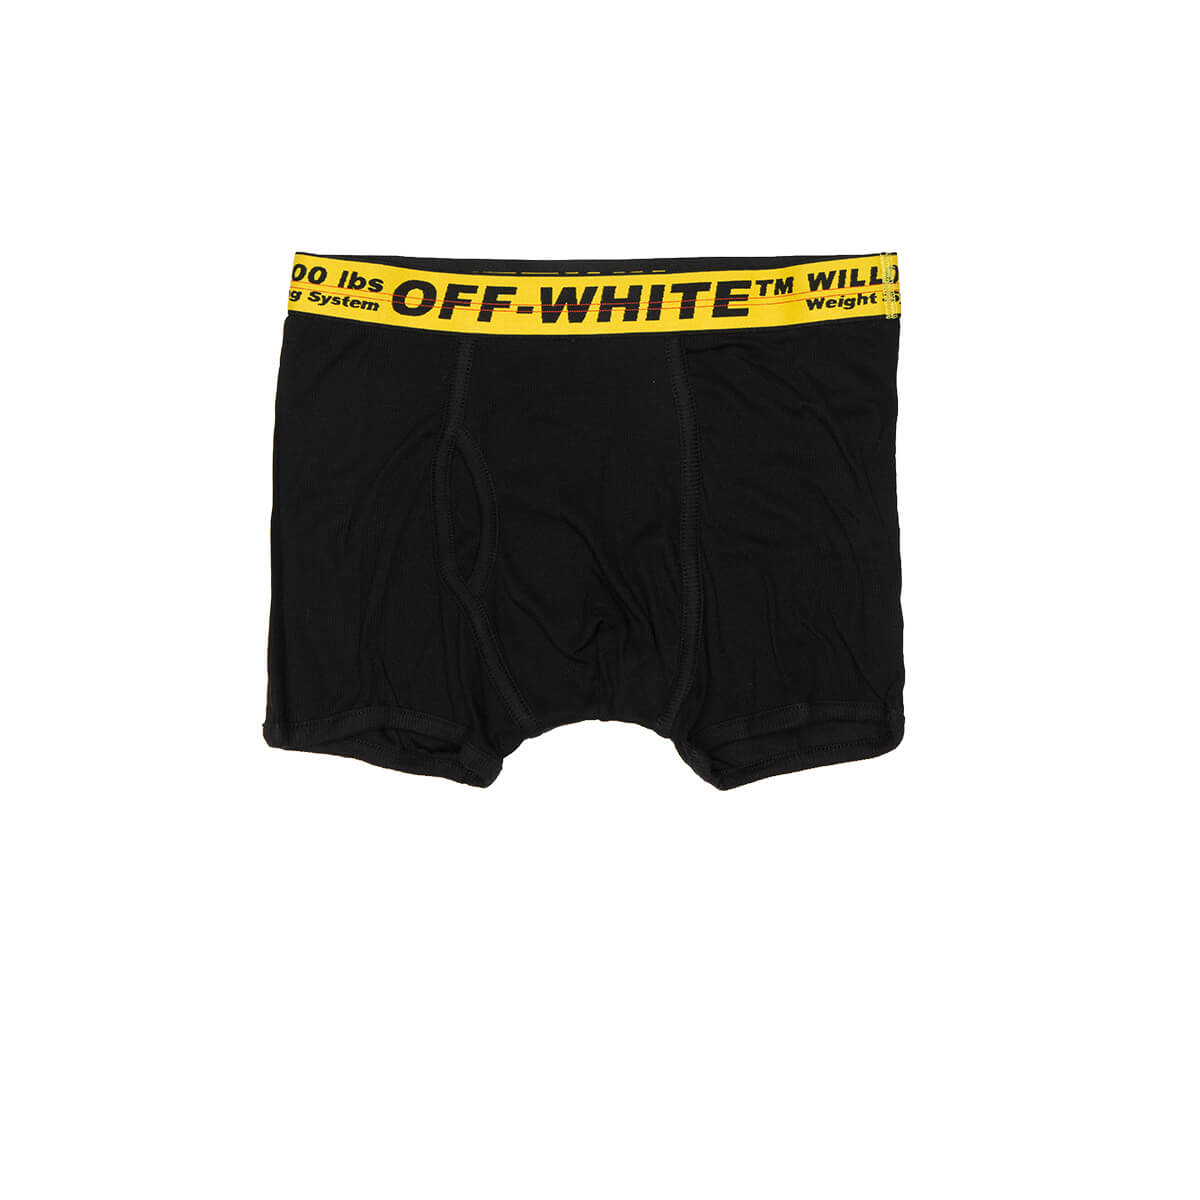 OFF-WHITE BOXER SHORTS SINGLE PACK,11238495